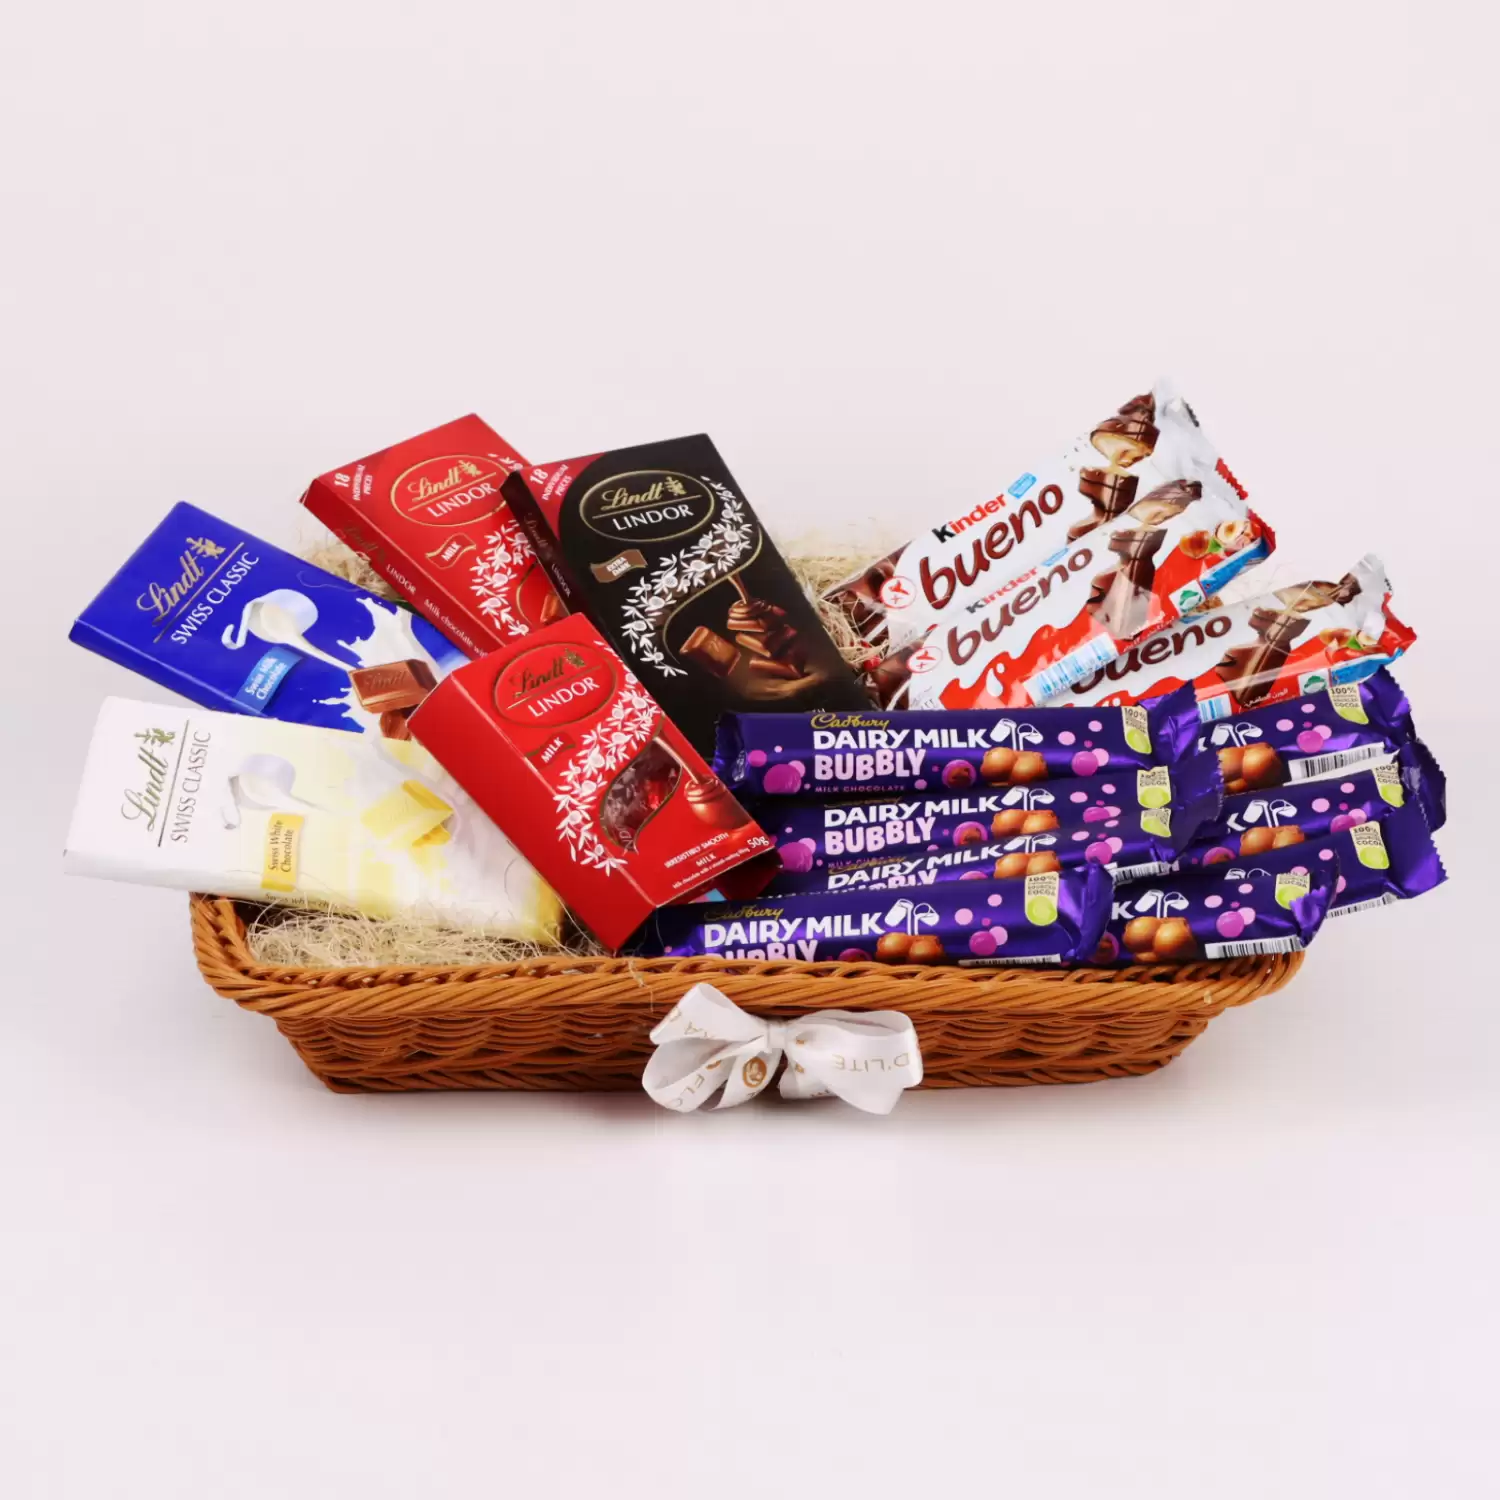 Assorted Choco Hamper | Buy Chocolates Online | Gifts Delivery Bahrain - Flora D'lite